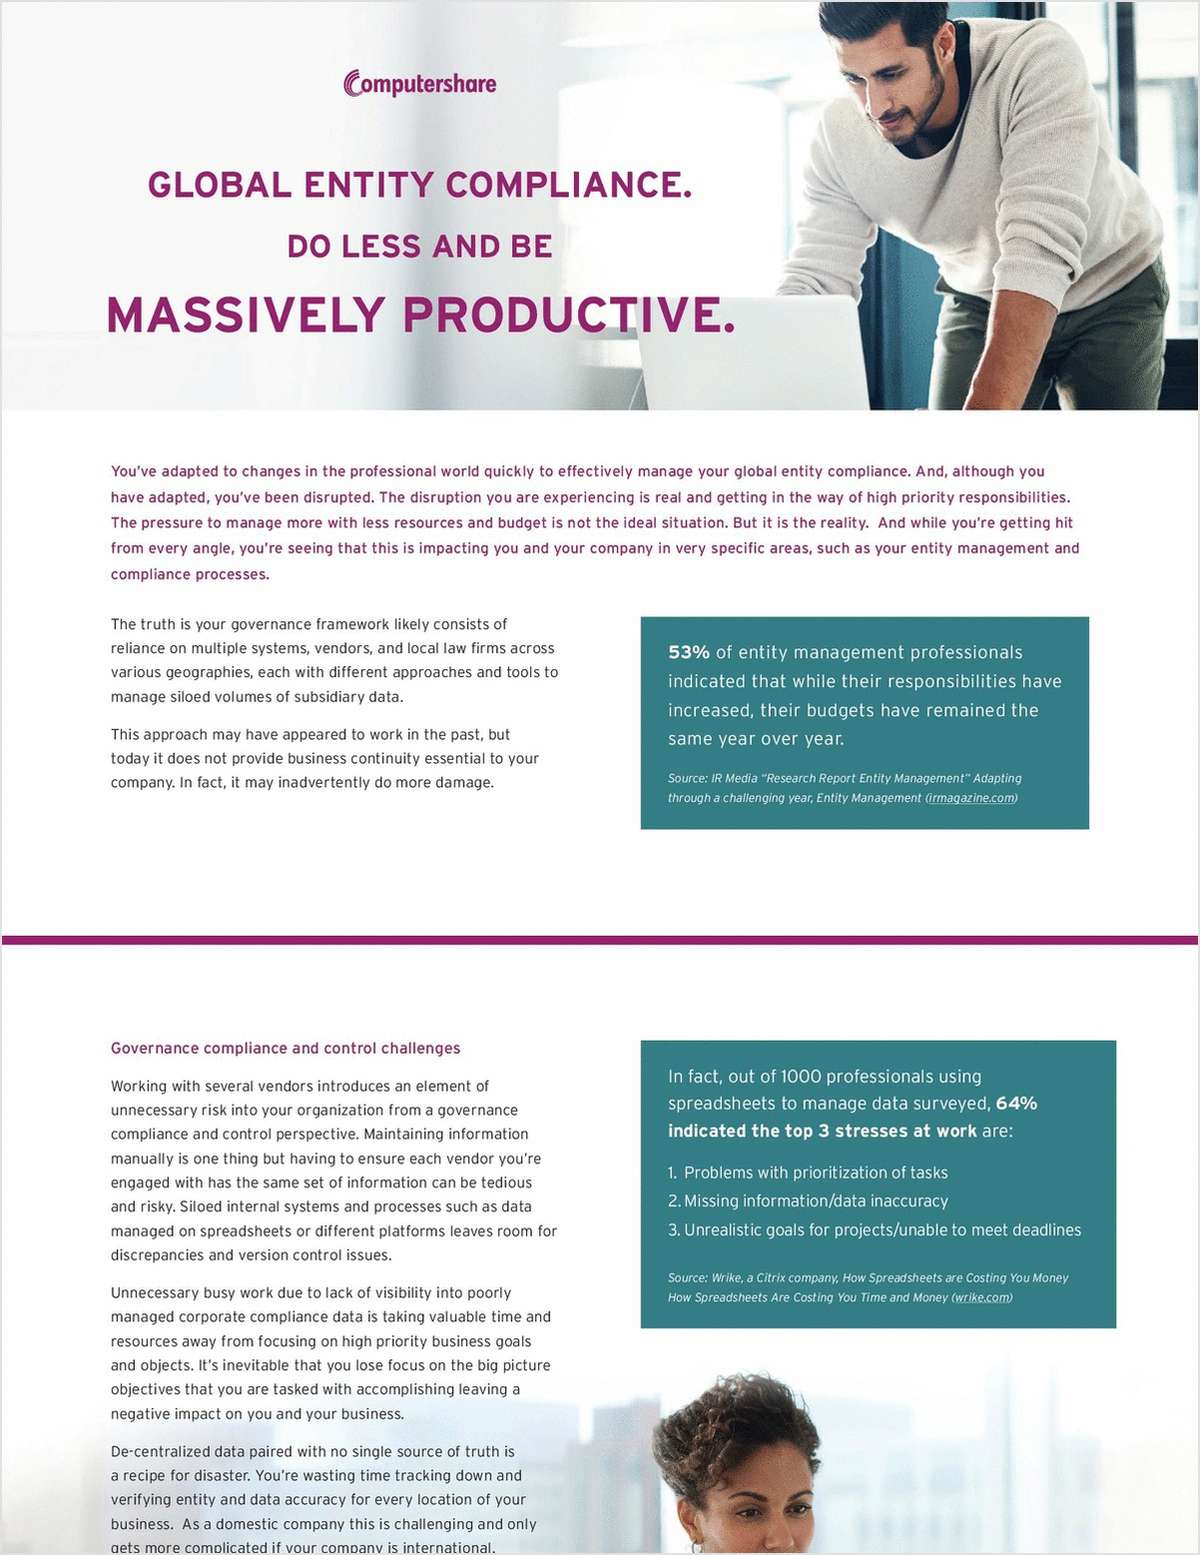 Pressure to do more with less is a growing concern in corporate law - further amplified by continuing disruptions - and it is likely impacting specific areas such as your entity management and compliance processes. This guide reveals how to  relieve compliance burdens, ensure data integrity, reduce inefficiencies, and become productive where it matters most.